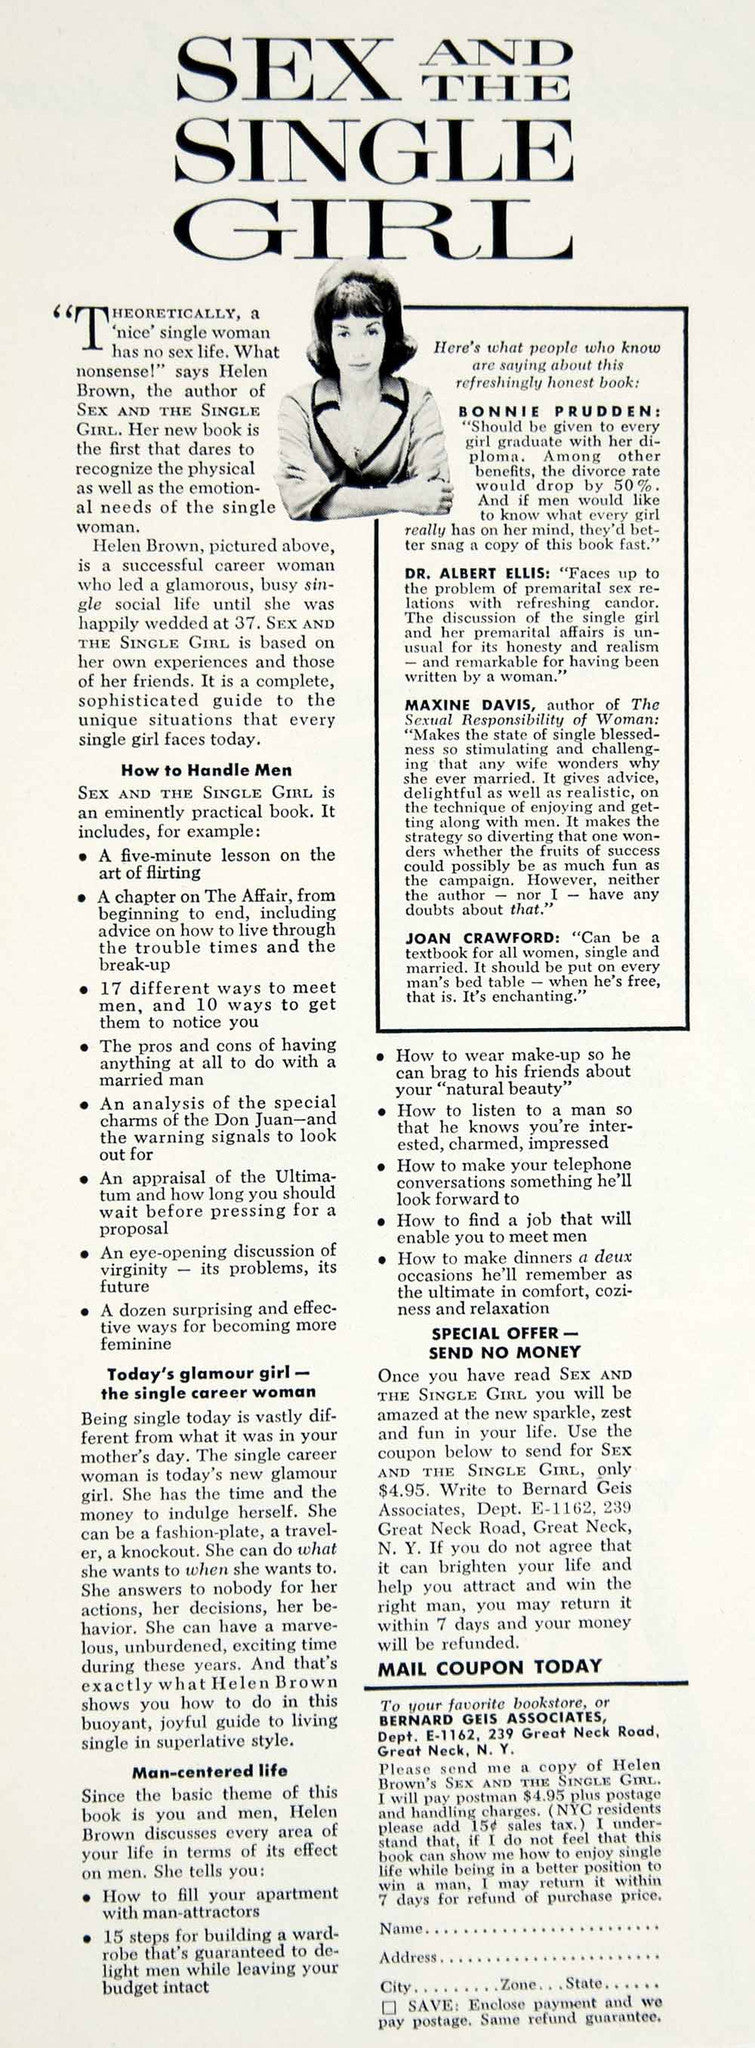 1962 Ad Sex and the Single Girl Helen Gurley Brown Womens Lib Feminism picture